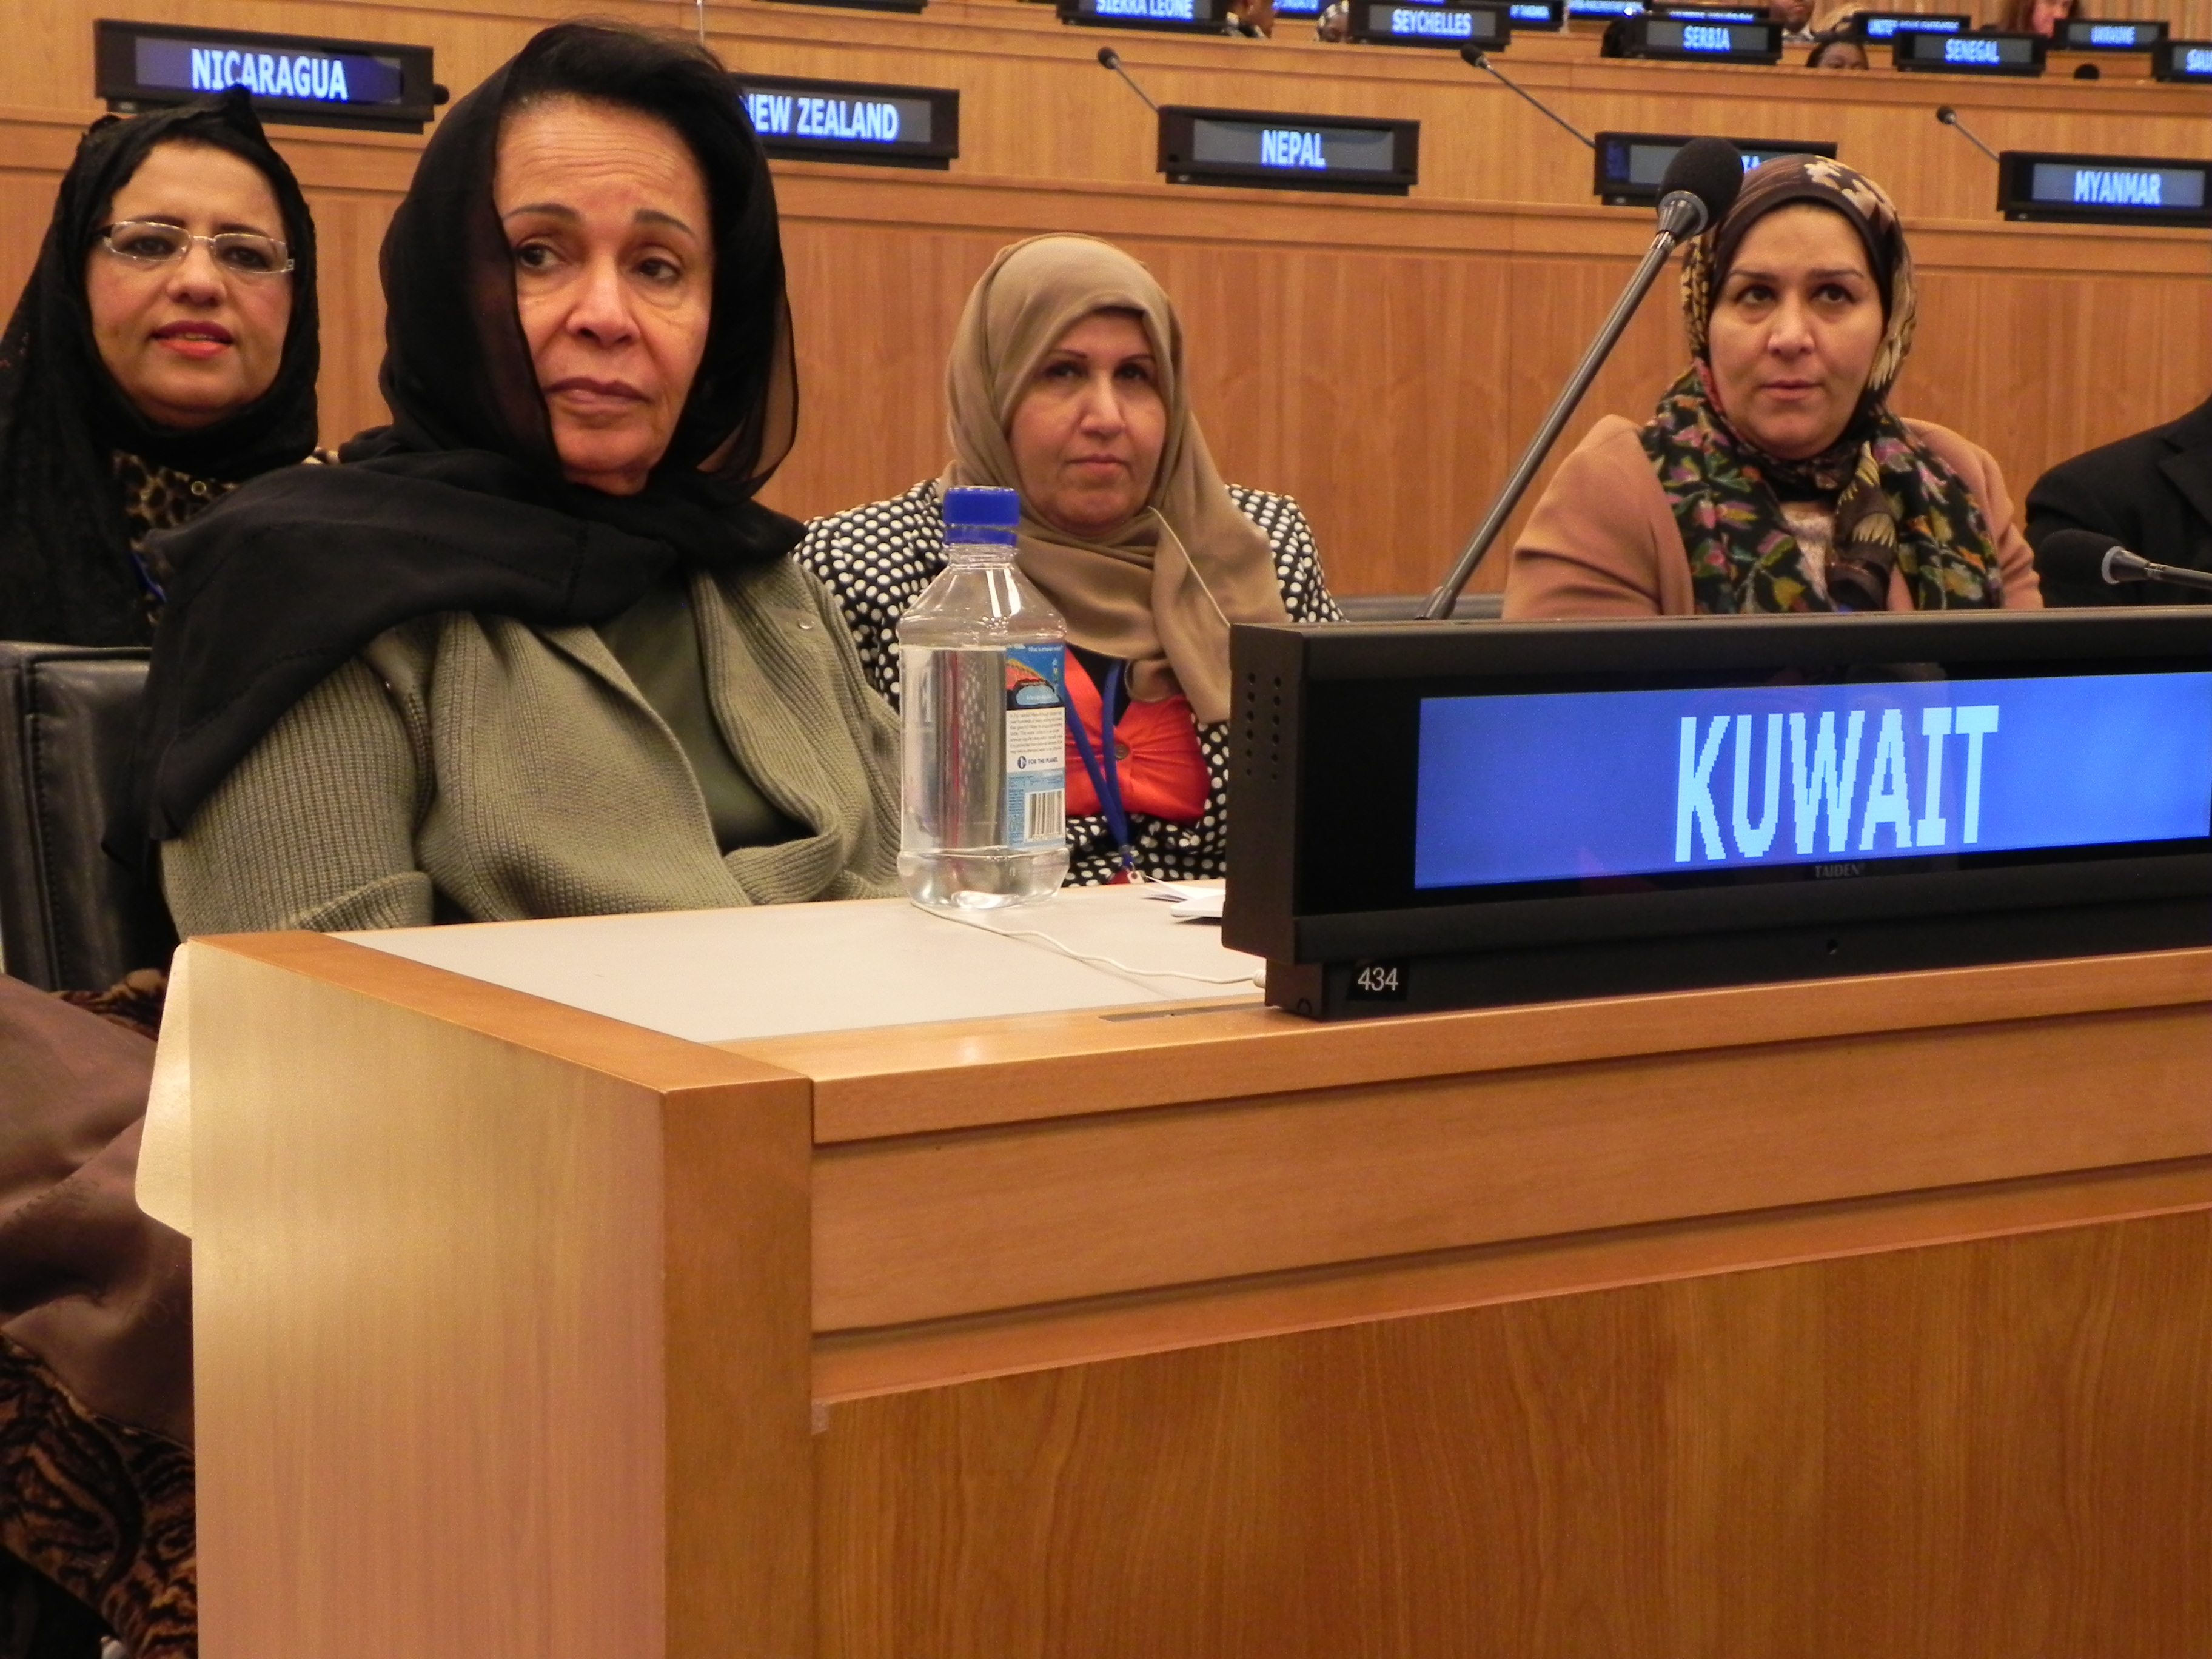 Chairperson of the Kuwaiti Cabinet's Committee on Women's Affairs, and President of the Kuwait Union of Women's Societies Sheikha Latifa Al-Fahad Al-Salem Al-Sabah and her accompanying delegation